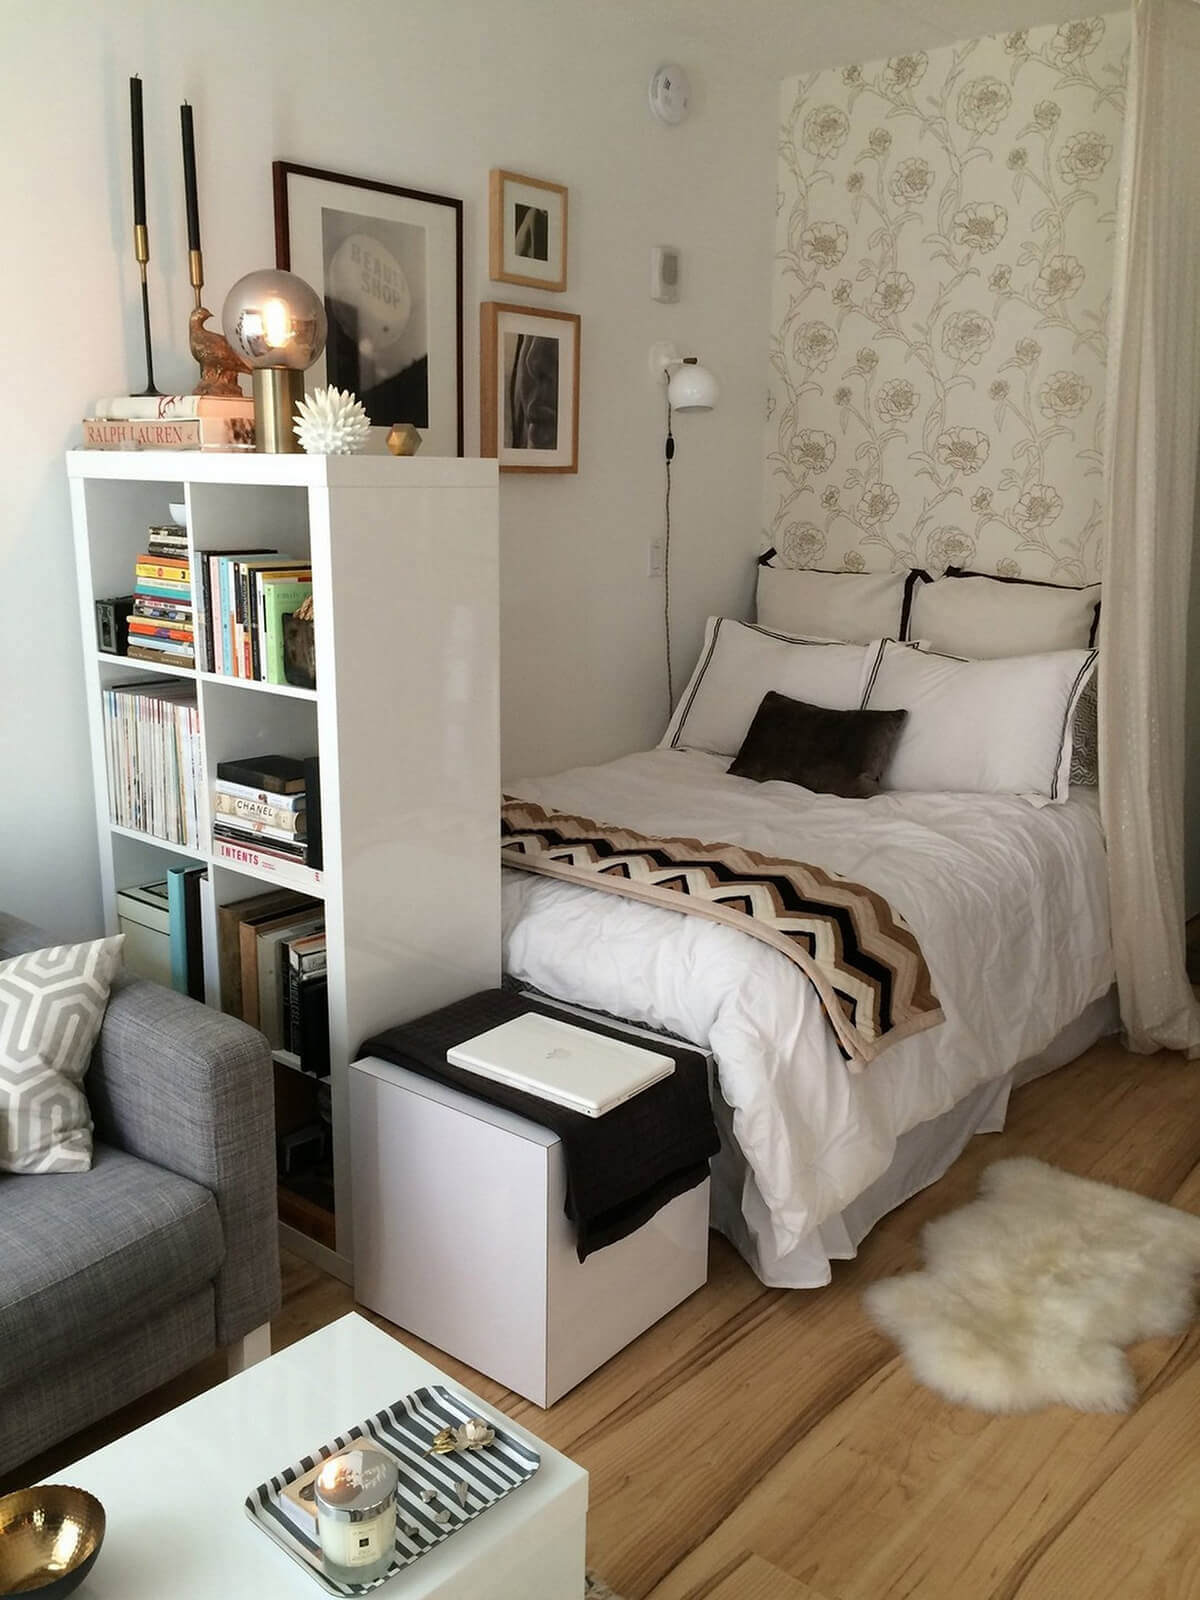 How We Organized Our Small Bedroom